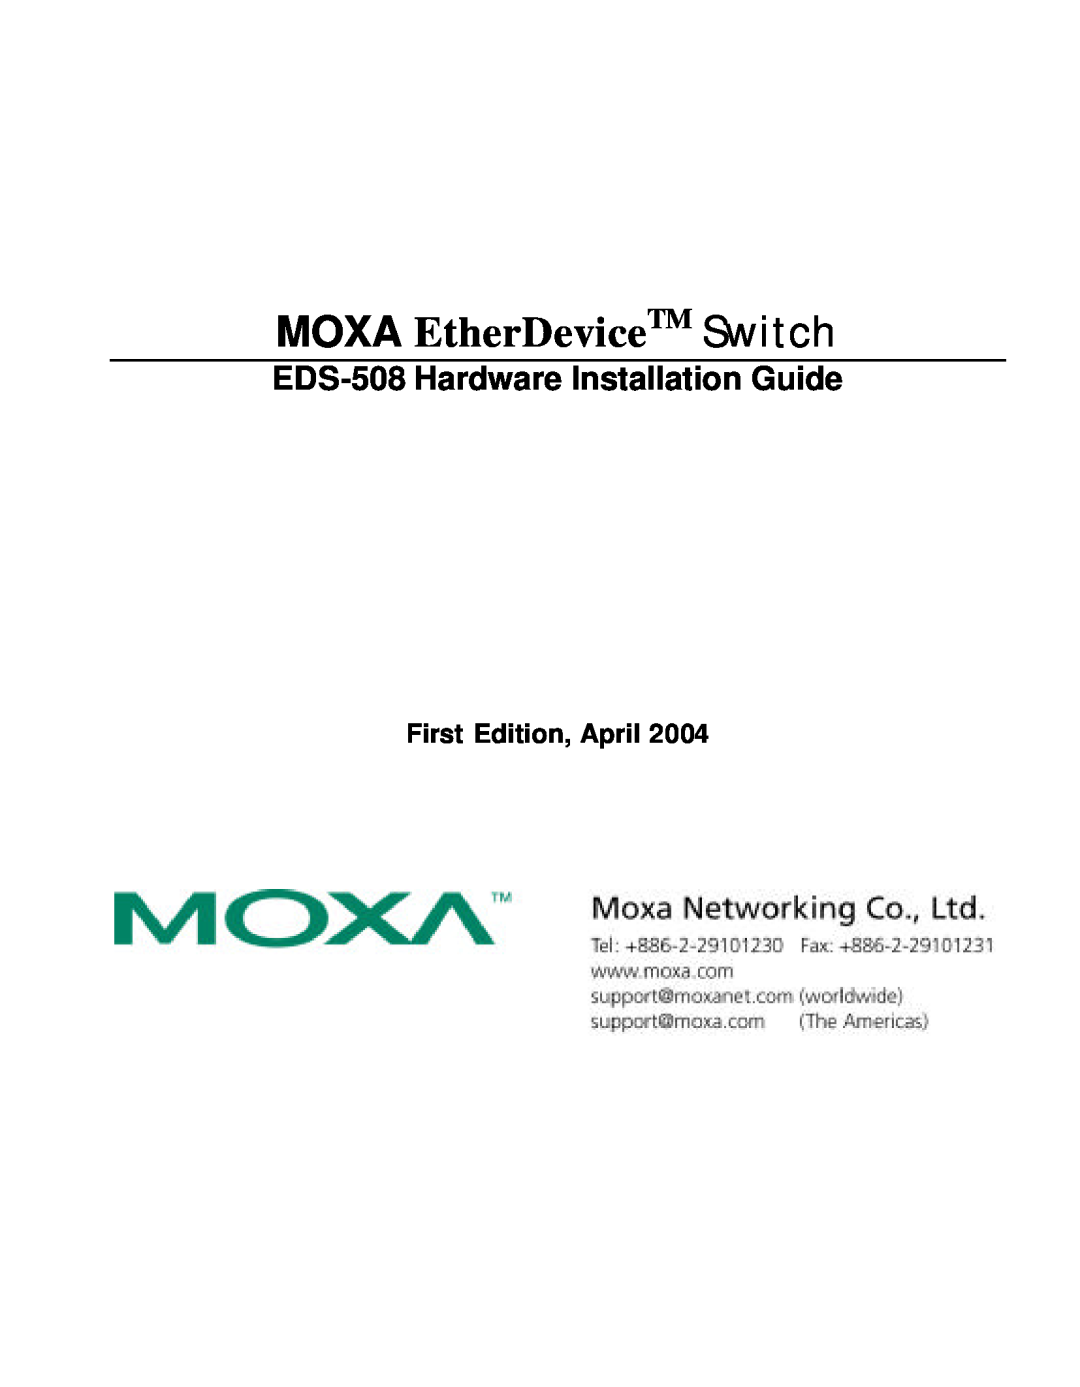 Moxa Technologies manual EDS-508 Hardware Installation Guide, First Edition, April, MOXA EtherDeviceTM Switch 